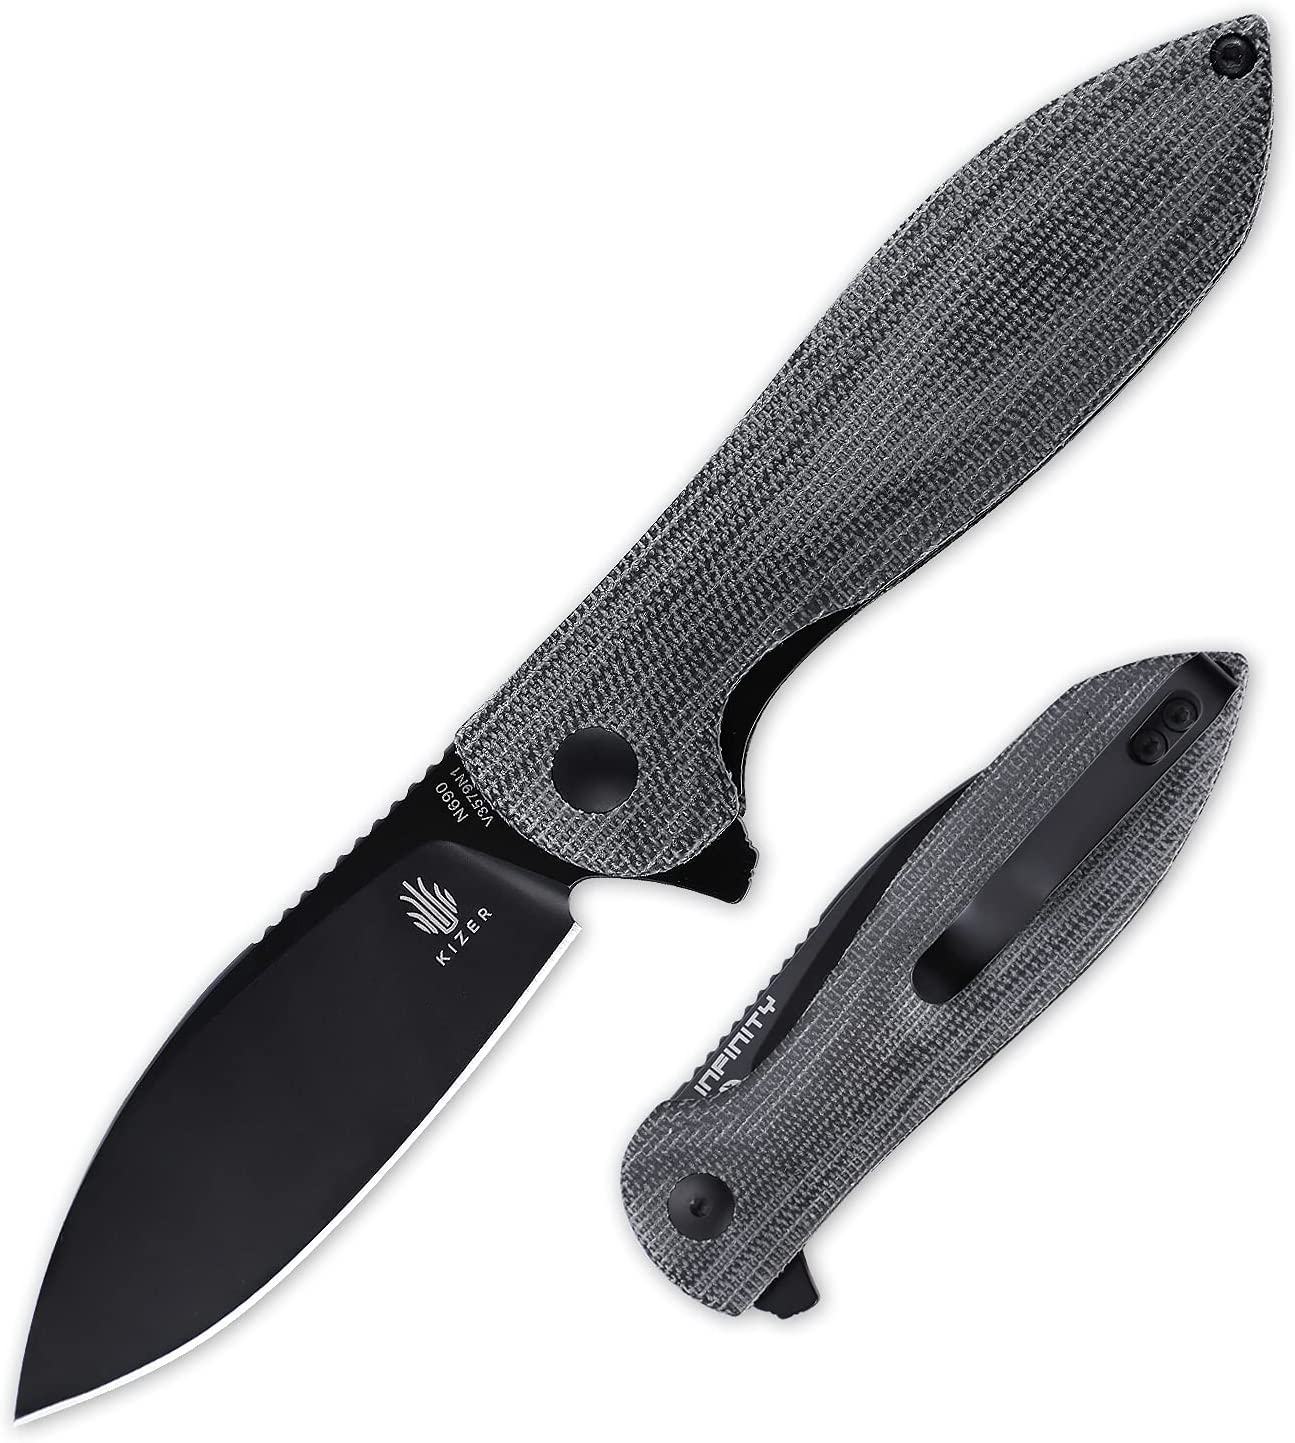 Kizer Infinity, Micarta Handle Pocket Knife with 2.95 Inches N690 Blade, Flipper, Folding Knives for Outdoor, Camping, EDC -V3579N1 (Black Micarta Handle+Black N690 Blade)